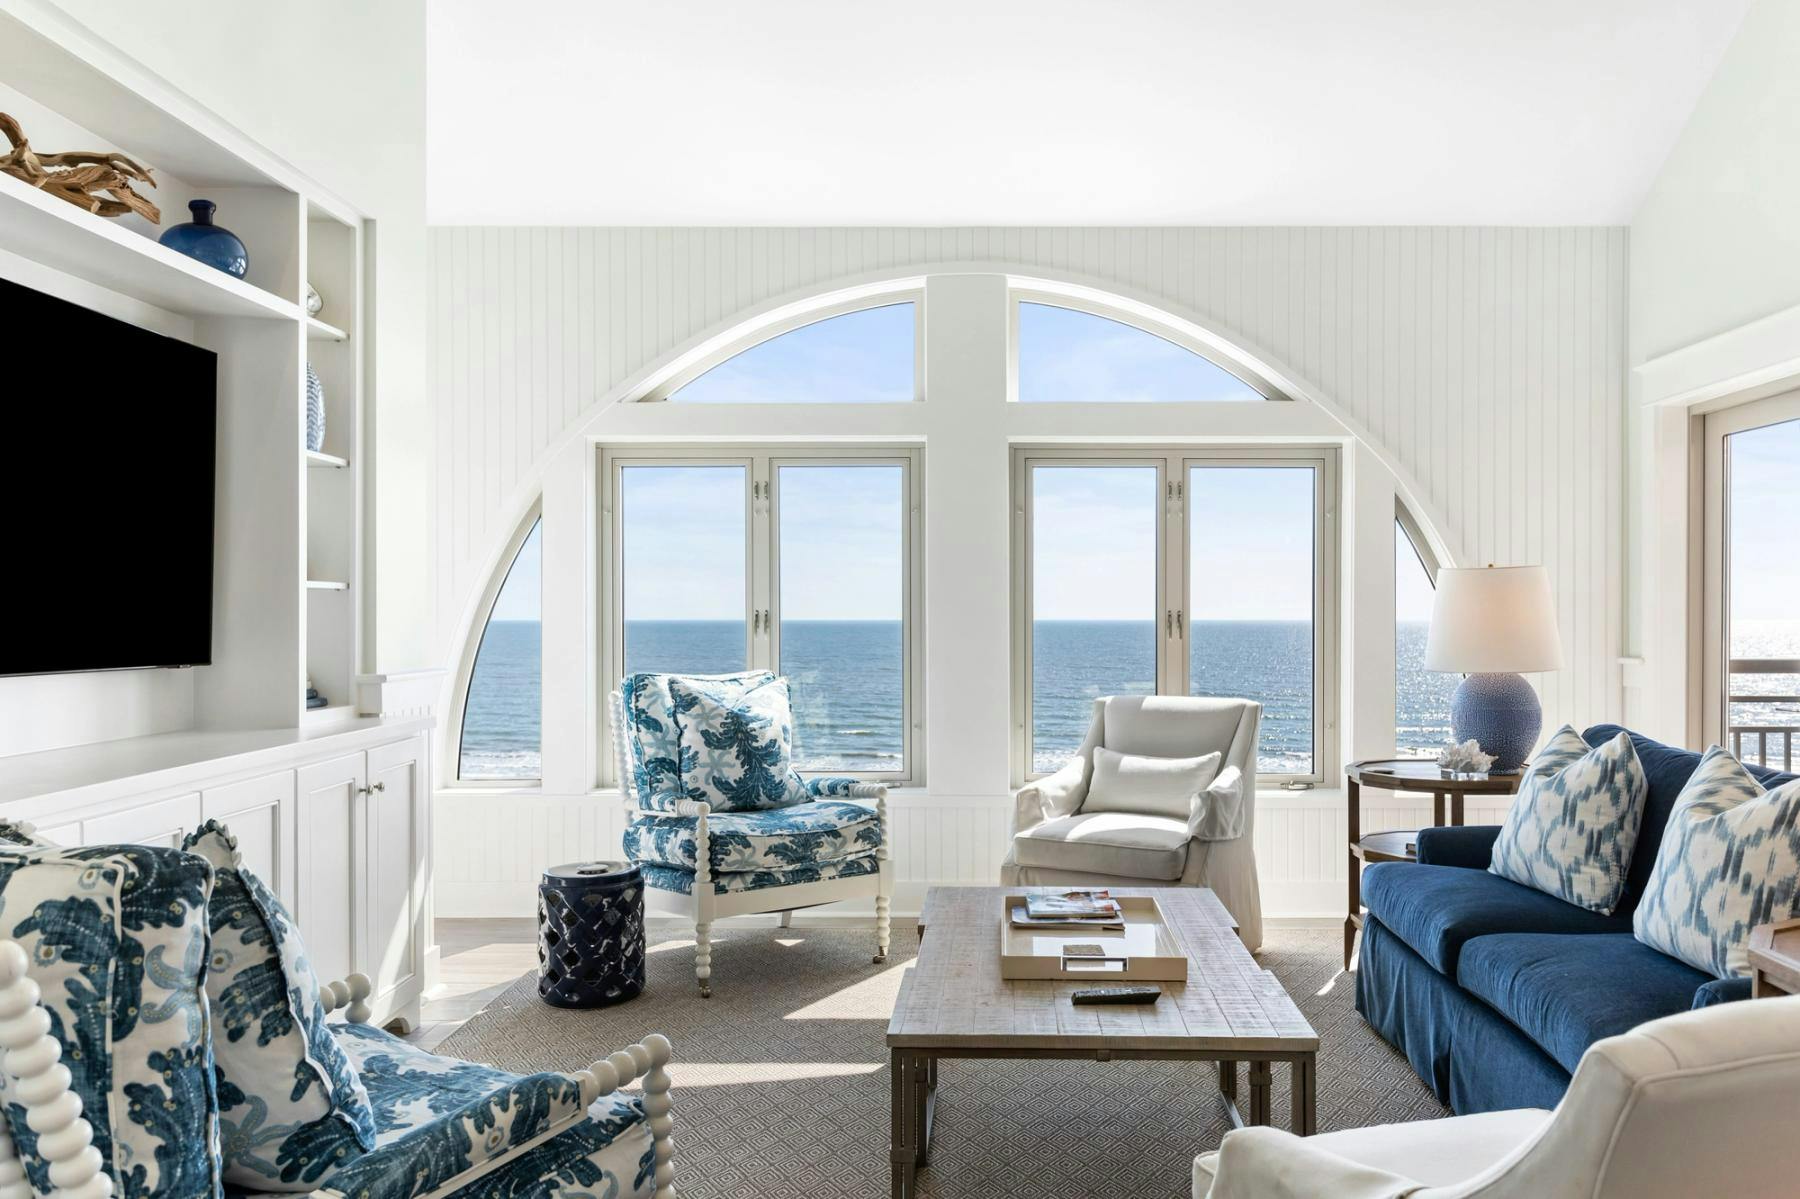 Oceanfront views from the living room of this Kiawah Island vacation rental.